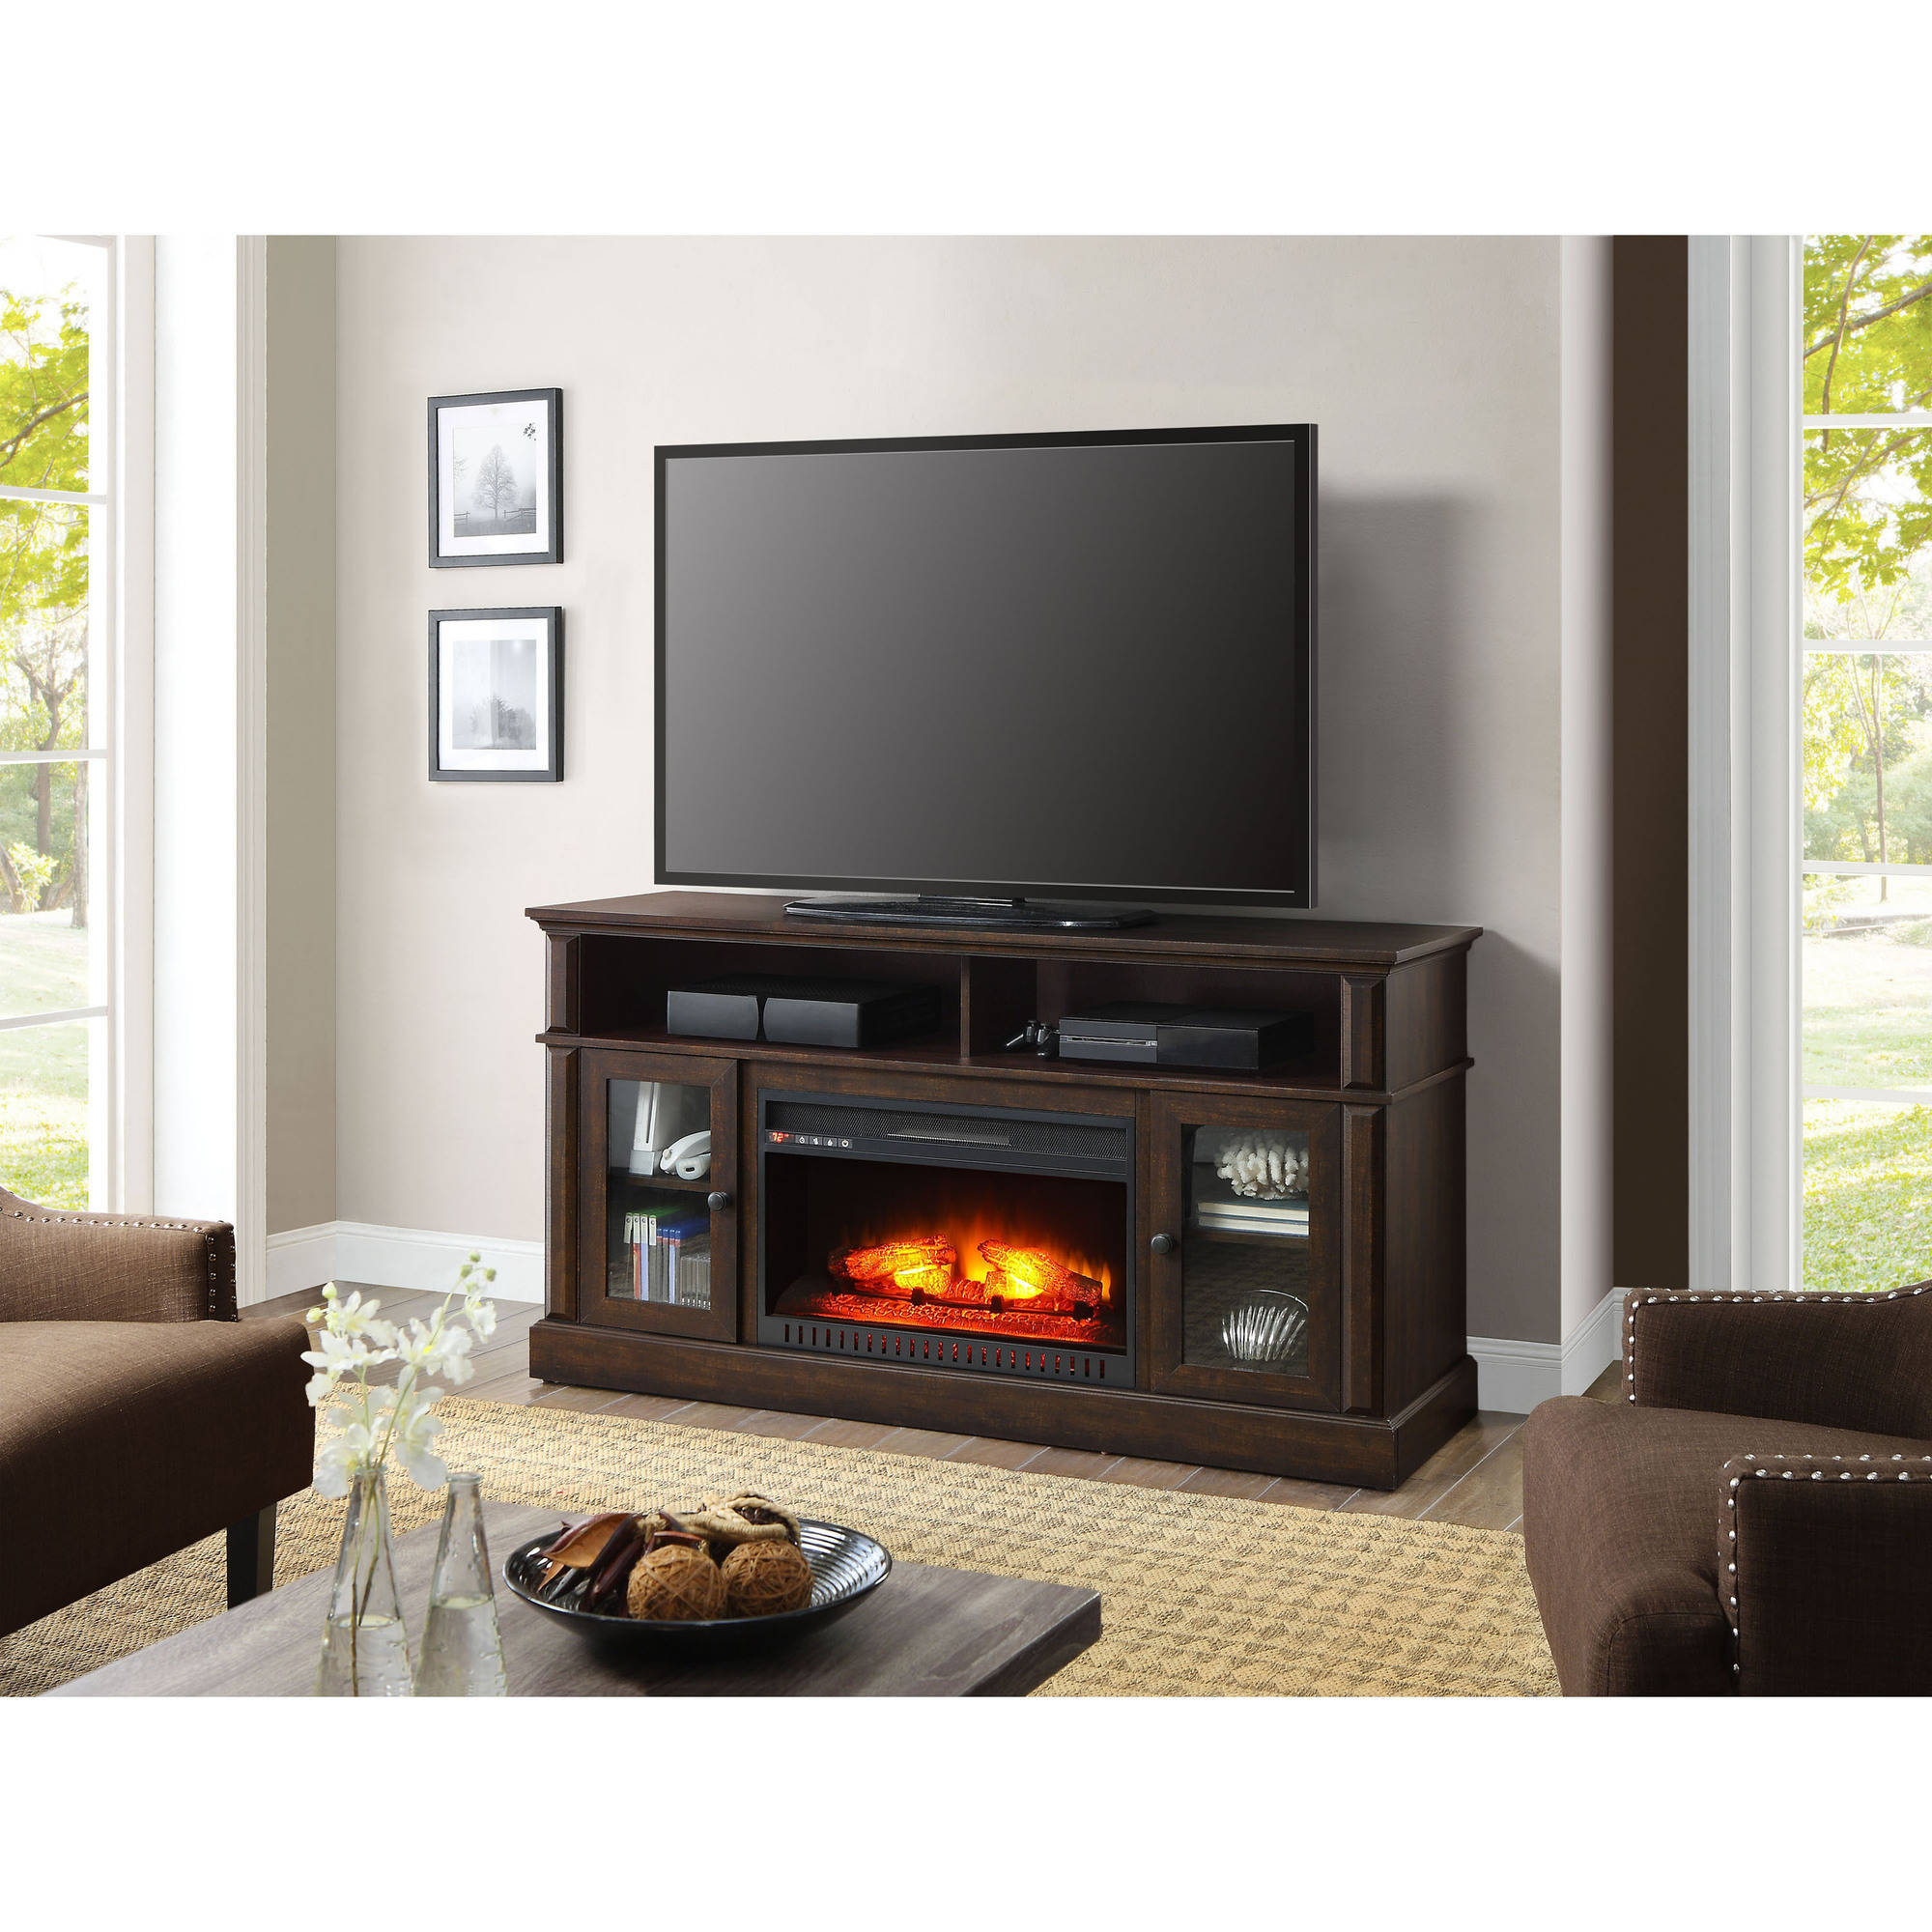 60 Inch Corner Tv Stand with Fireplace Unique Whalen Barston Media Fireplace for Tv S Up to 70 Multiple